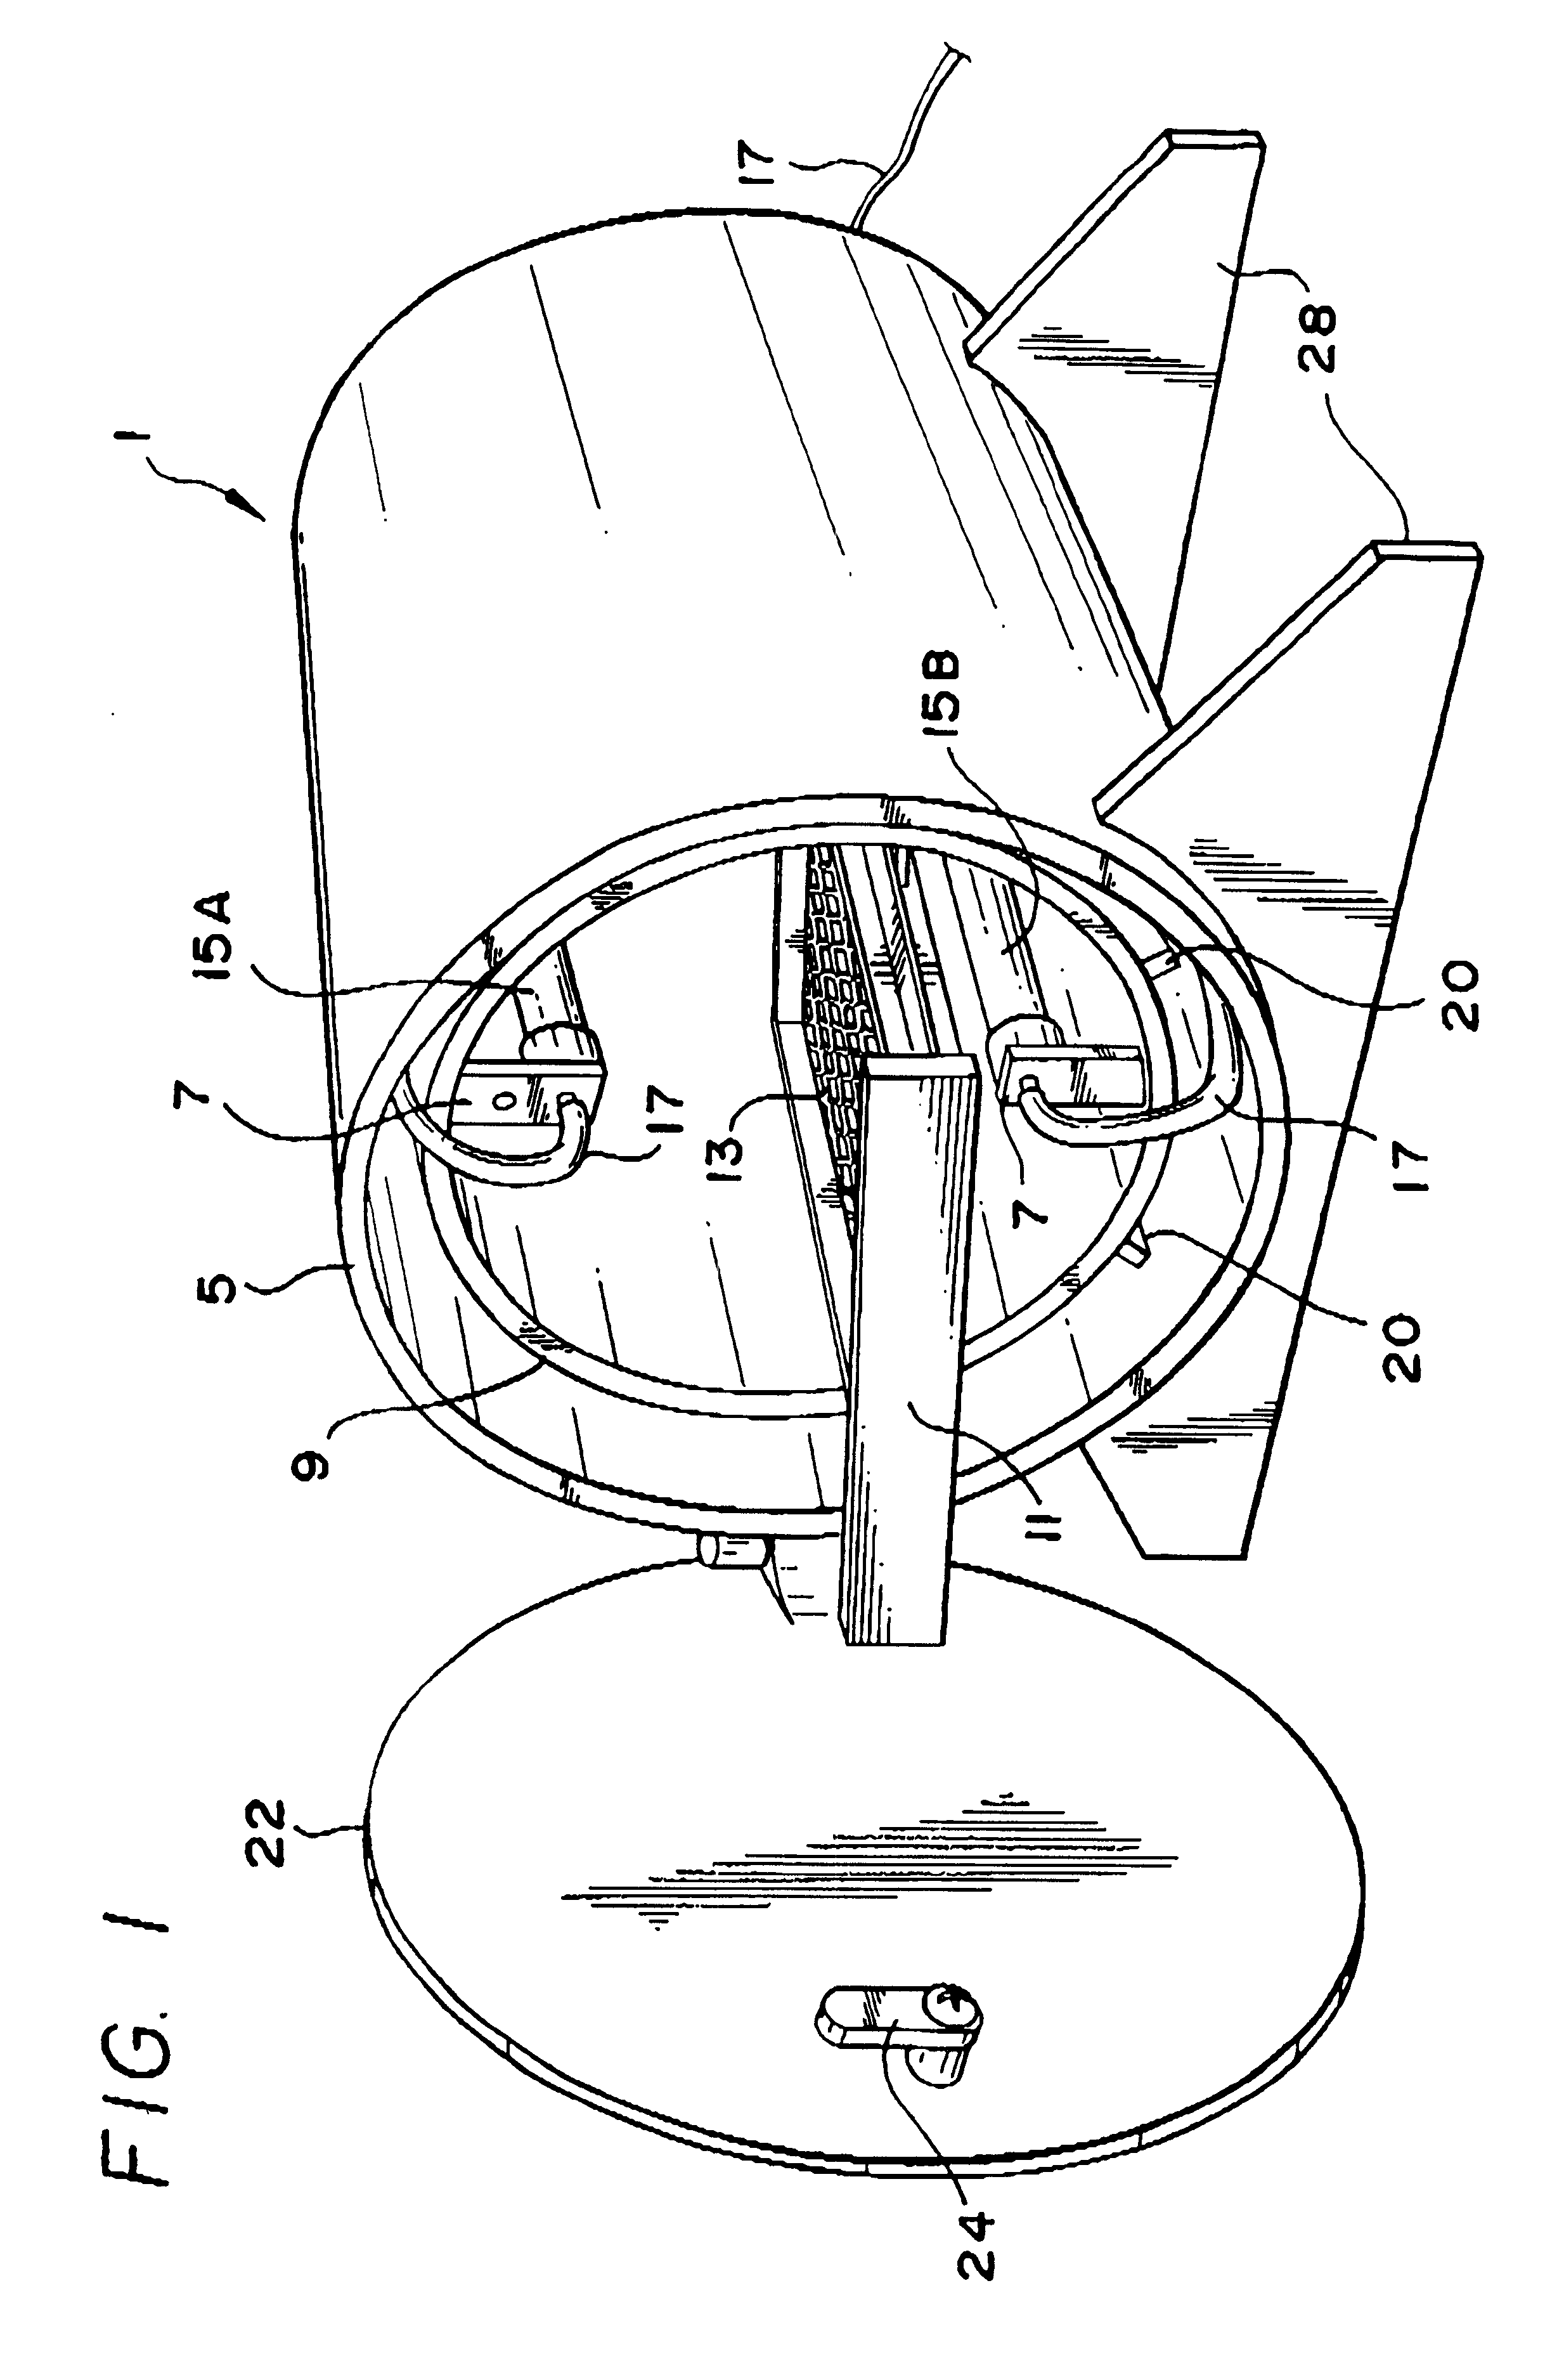 Method and apparatus for infrared sterilization